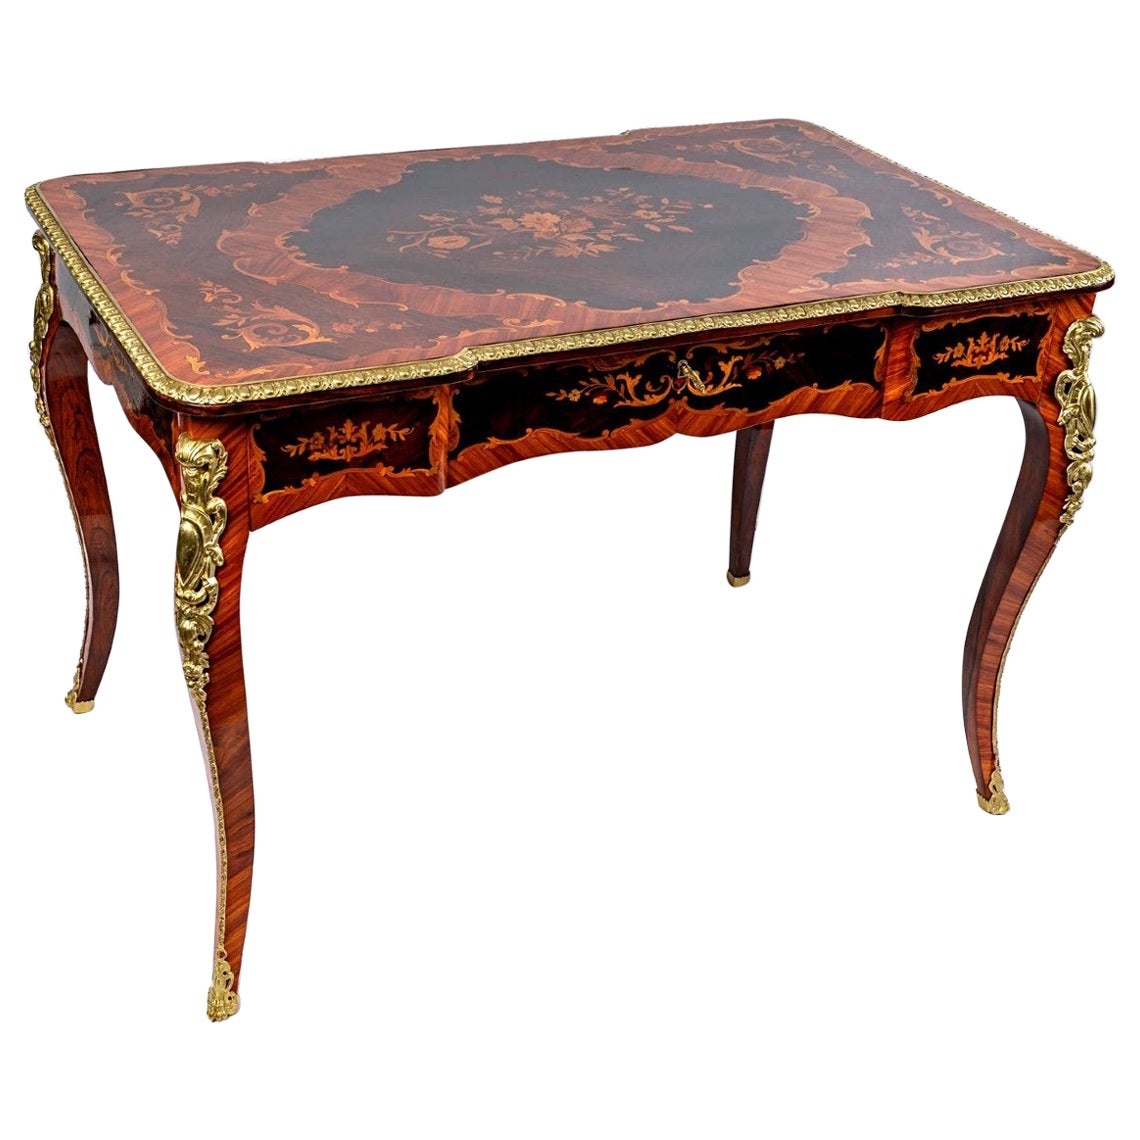 Magnificent Flat Desk - Louis XV Style - Precious Wood Marquetry -Golden Bronzes For Sale